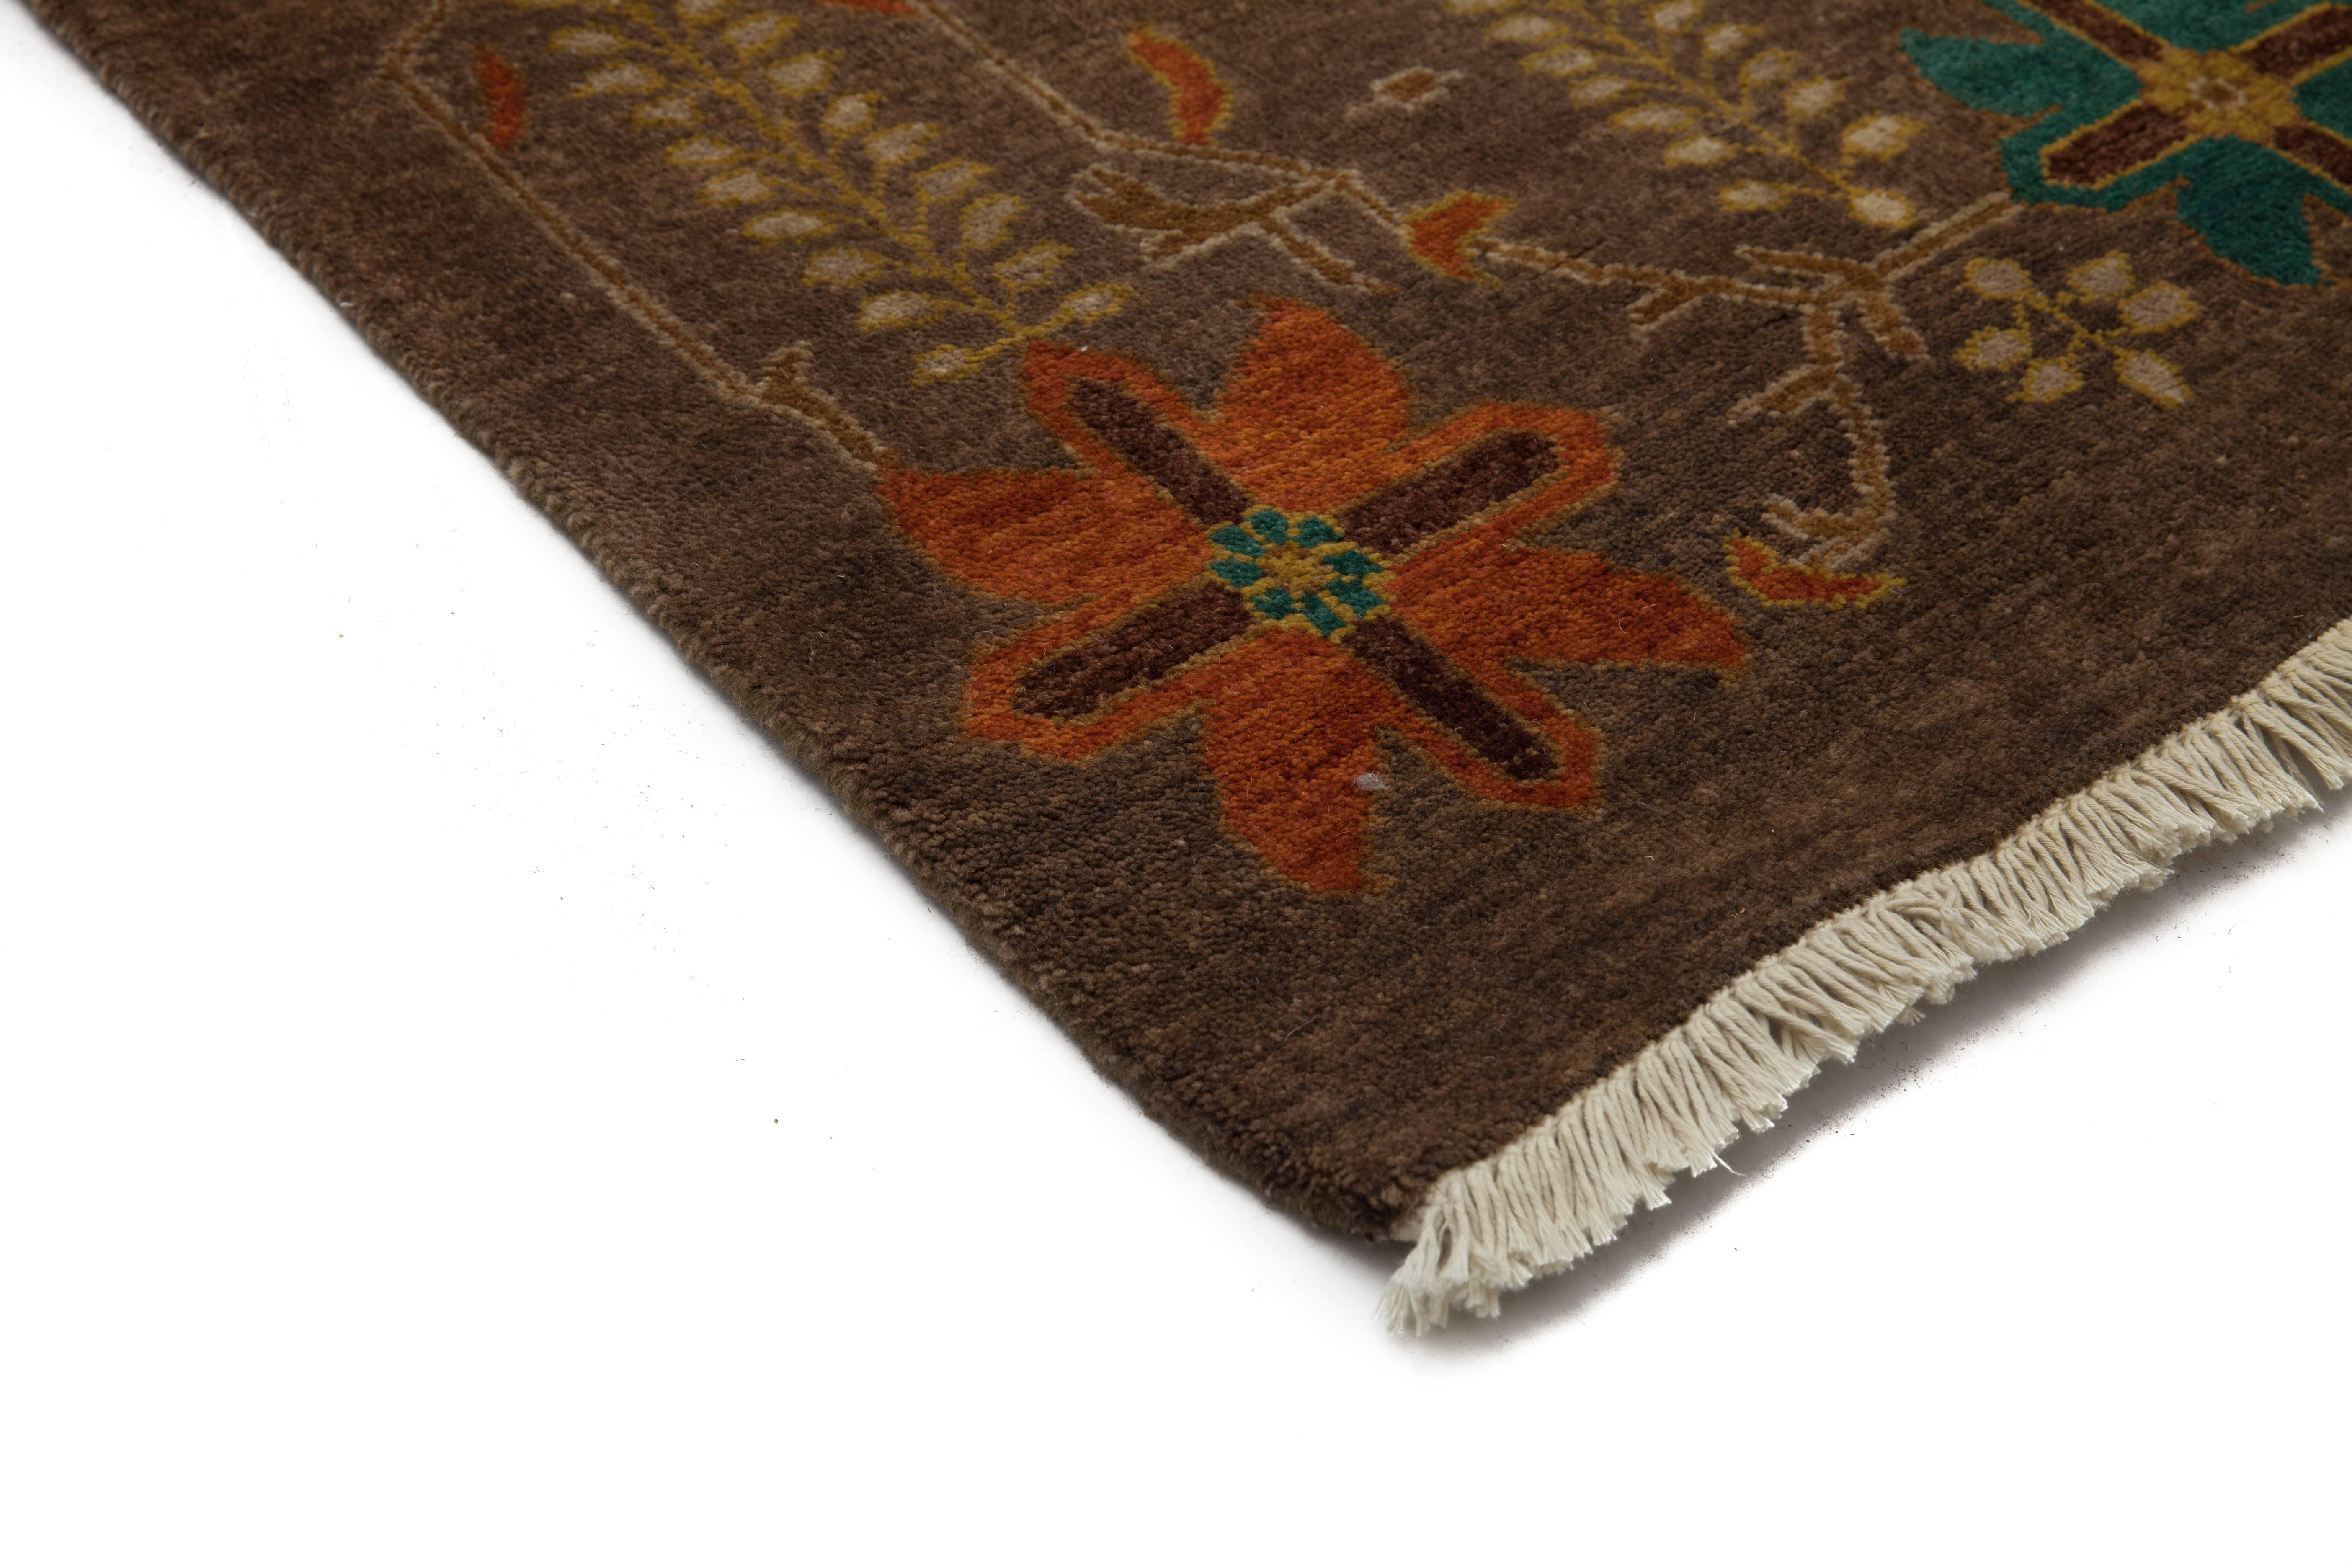 The tradition of hand-knotting rugs has been passed from generation to generation. Because each knot is made by hand, rugs of this type are truly one-of-a-kind and can take months to complete. Renowned for their timelessness, traditional-style rugs